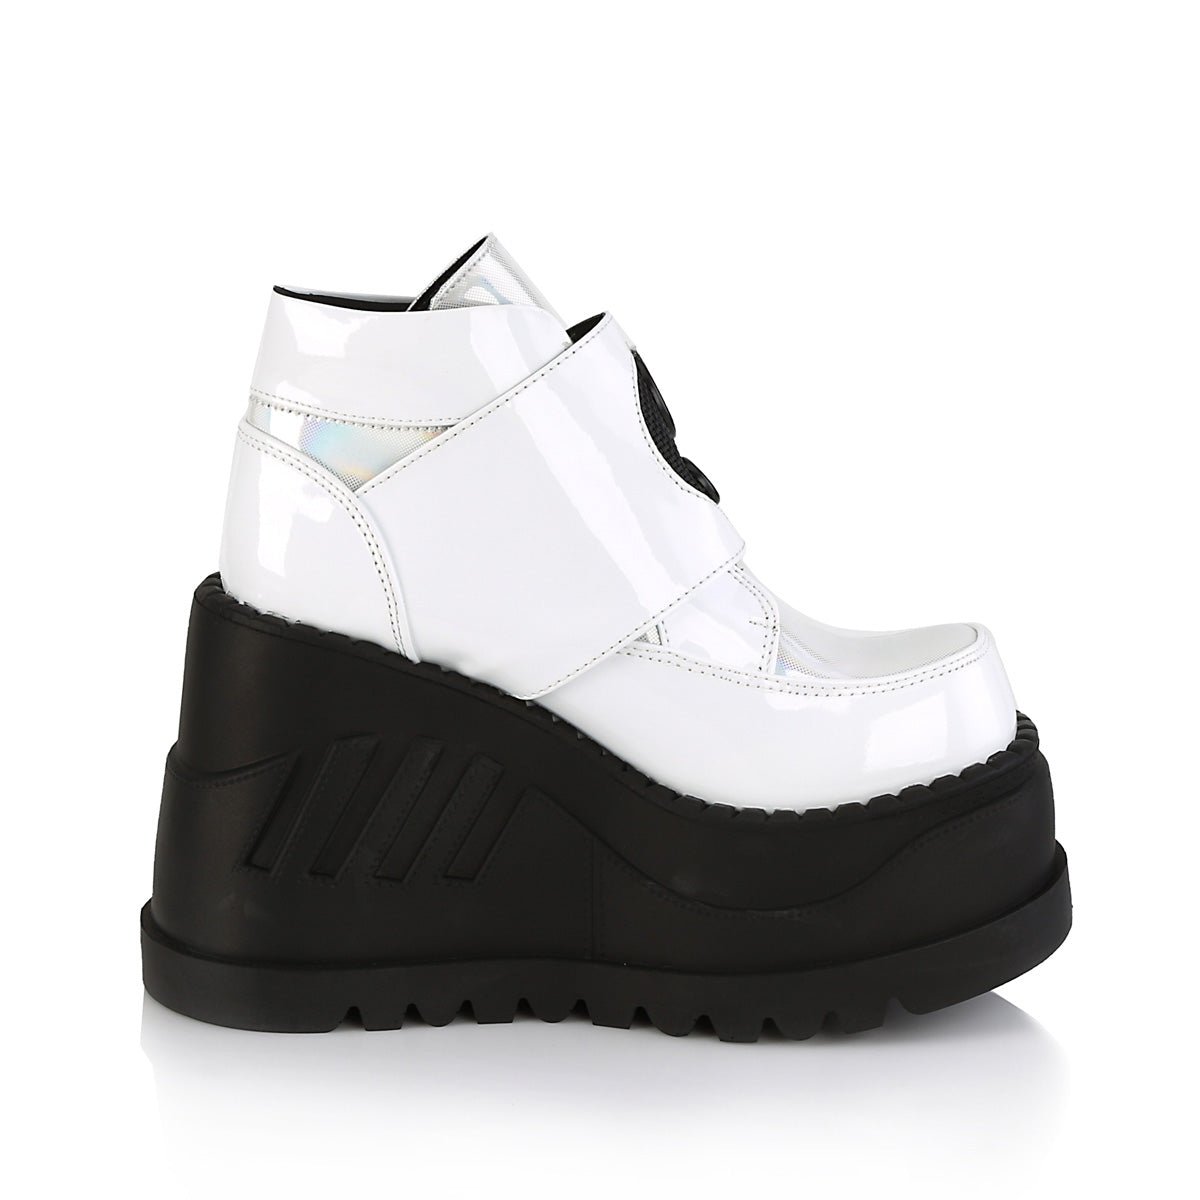 Too Fast | Demonia Stomp 15 | White Patent Leather Women's Ankle Boots